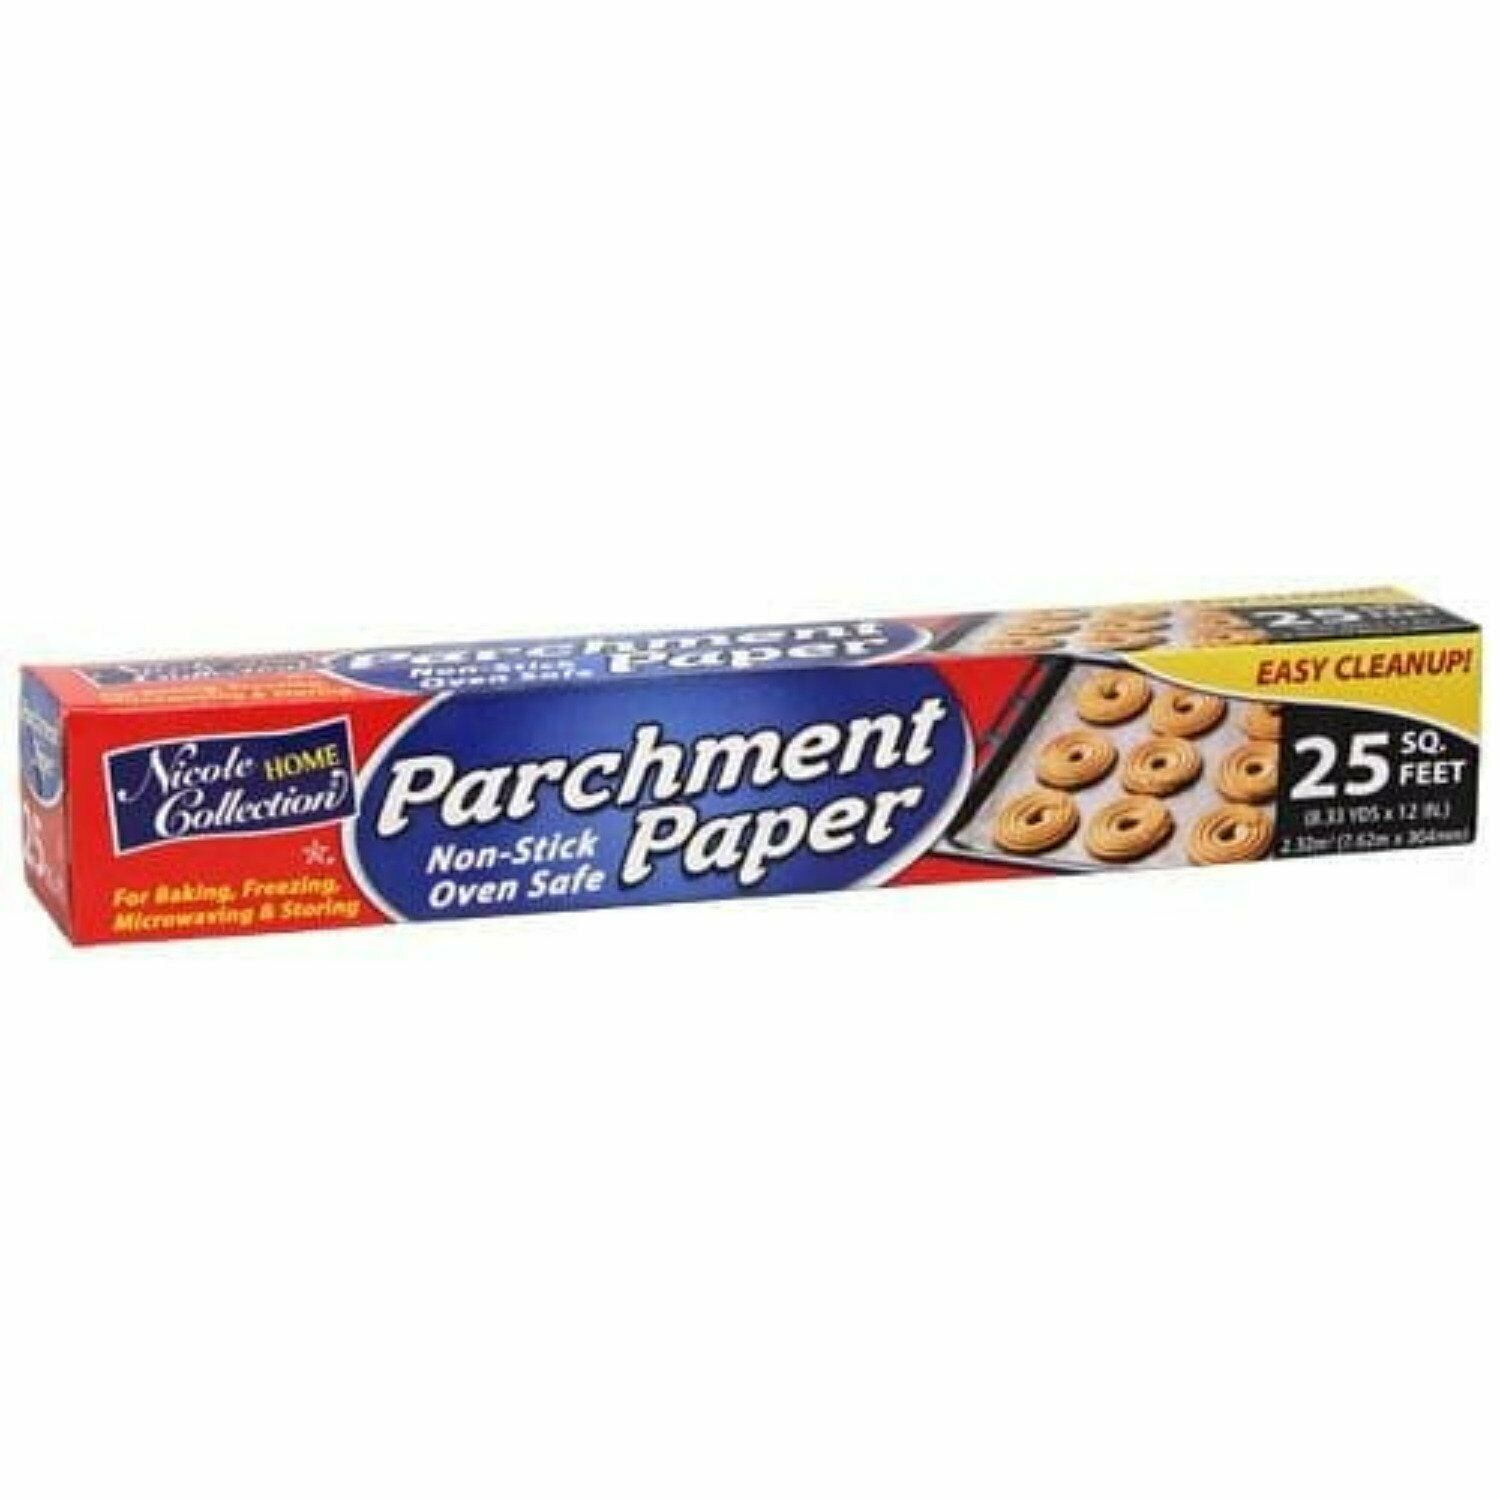 Nicole Collection Kitchen Parchment Paper Roll 25 Square Feet 12x25'' BULK  (25 Square Feet (1 Package))